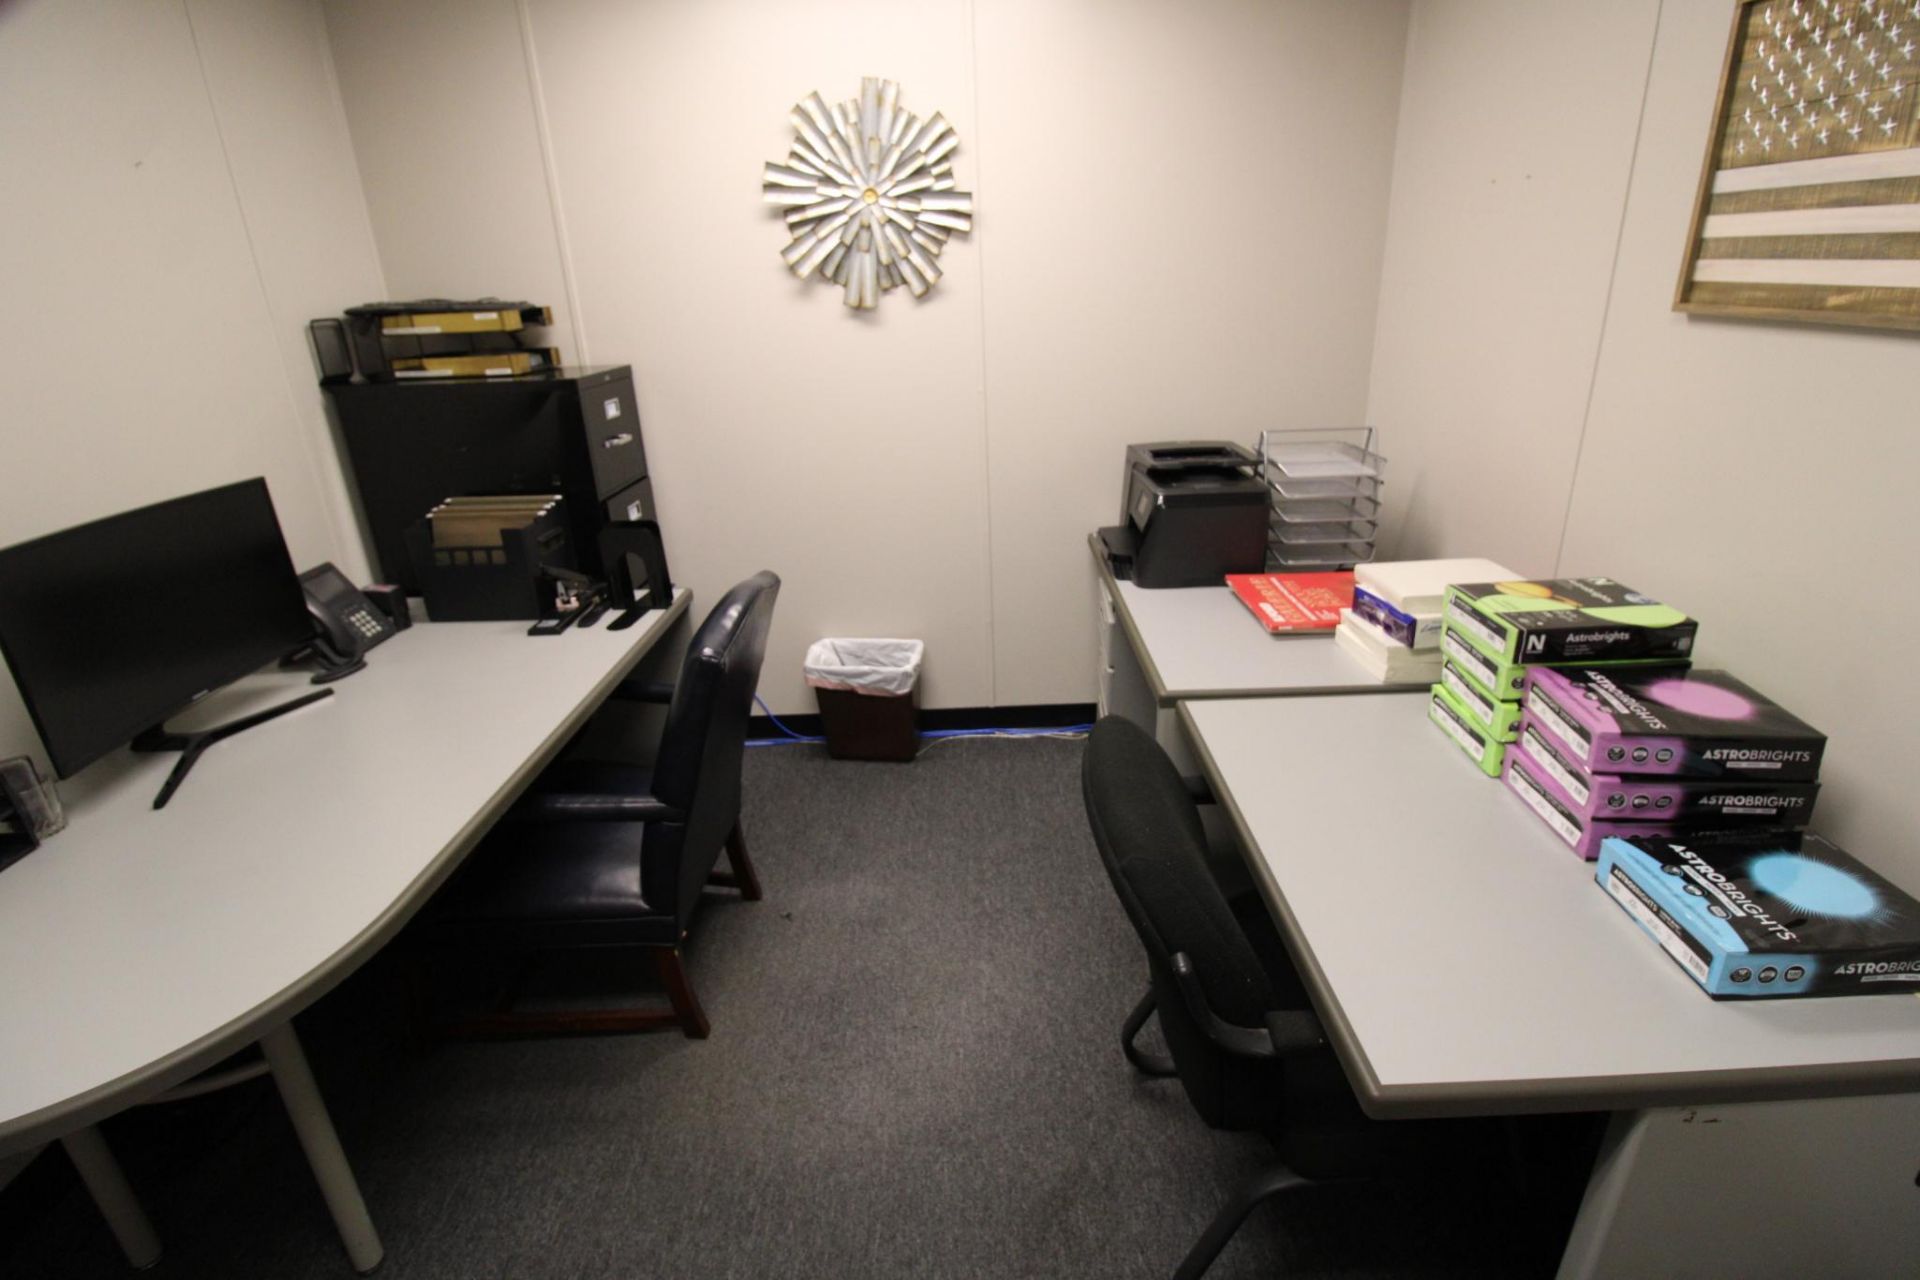 LOT CONTENTS OF OFFICE: desk, credenza, file cabinet, copy paper, printers, etc. - Image 5 of 5